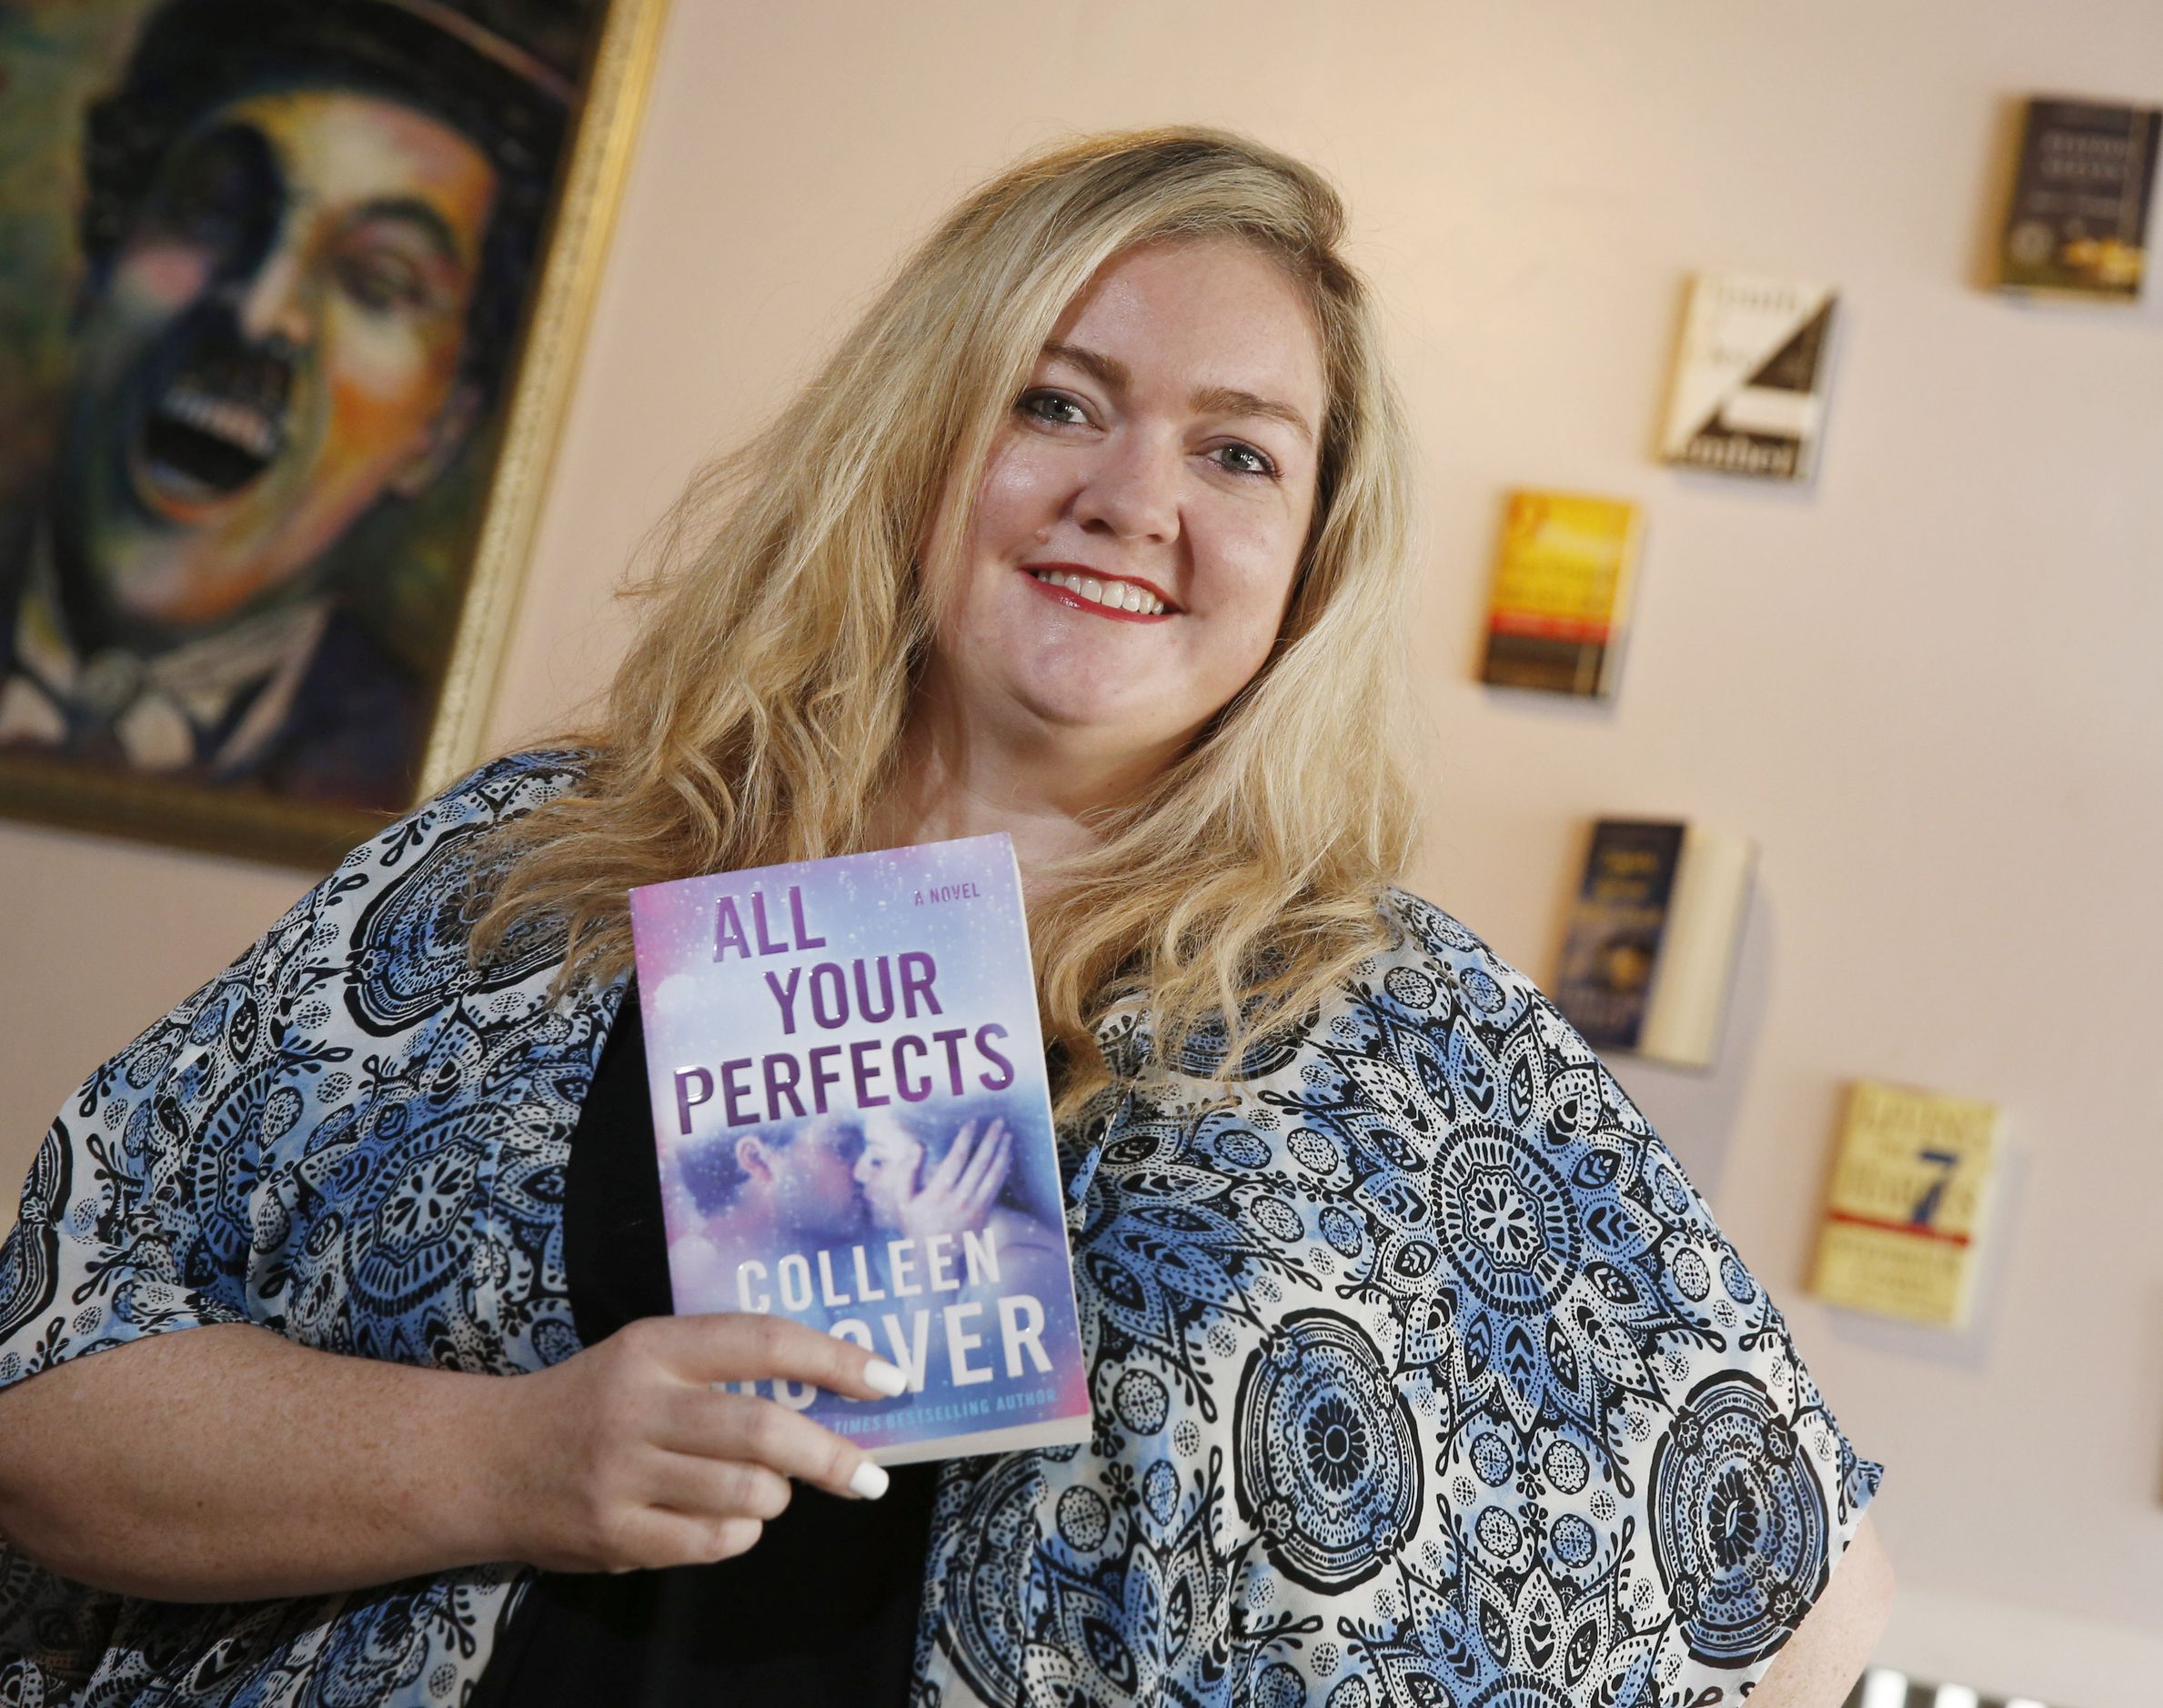 Who Is Colleen Hoover, the Texas Author Taking the Romance Genre By Storm?